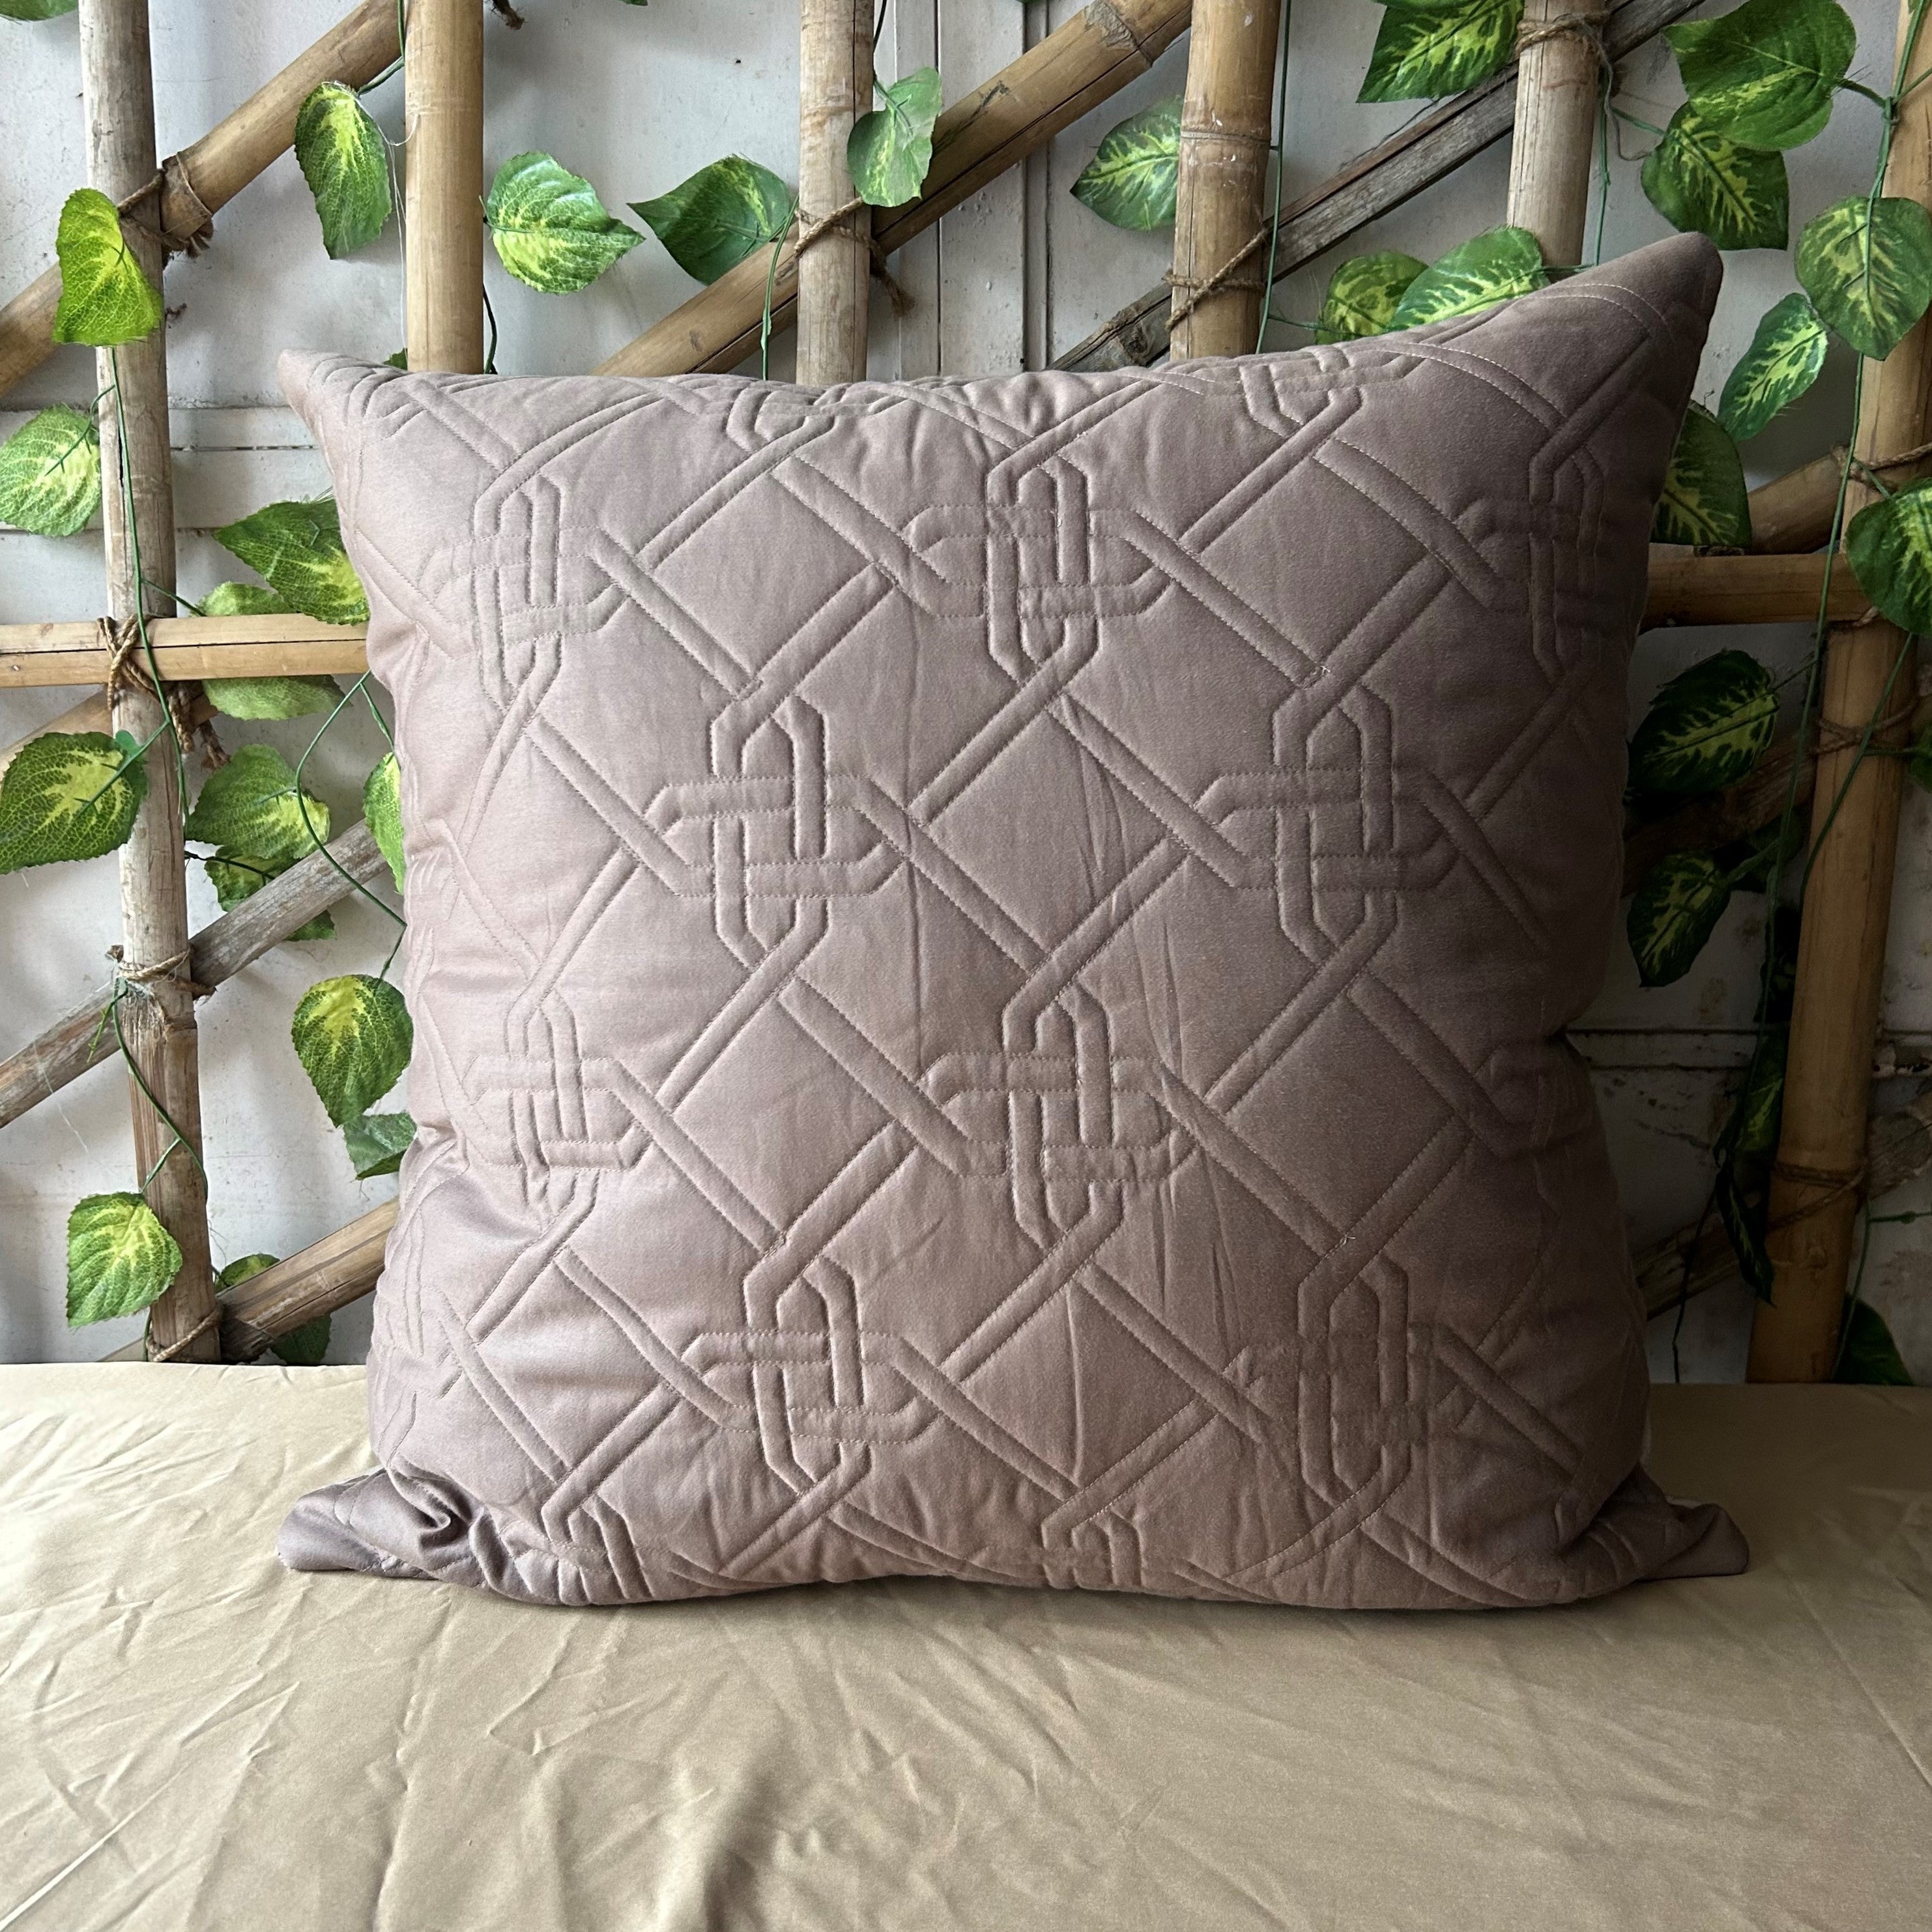 Gizmo Beige and Taupe Quilted Reversible Cotton Rich Euro Sham